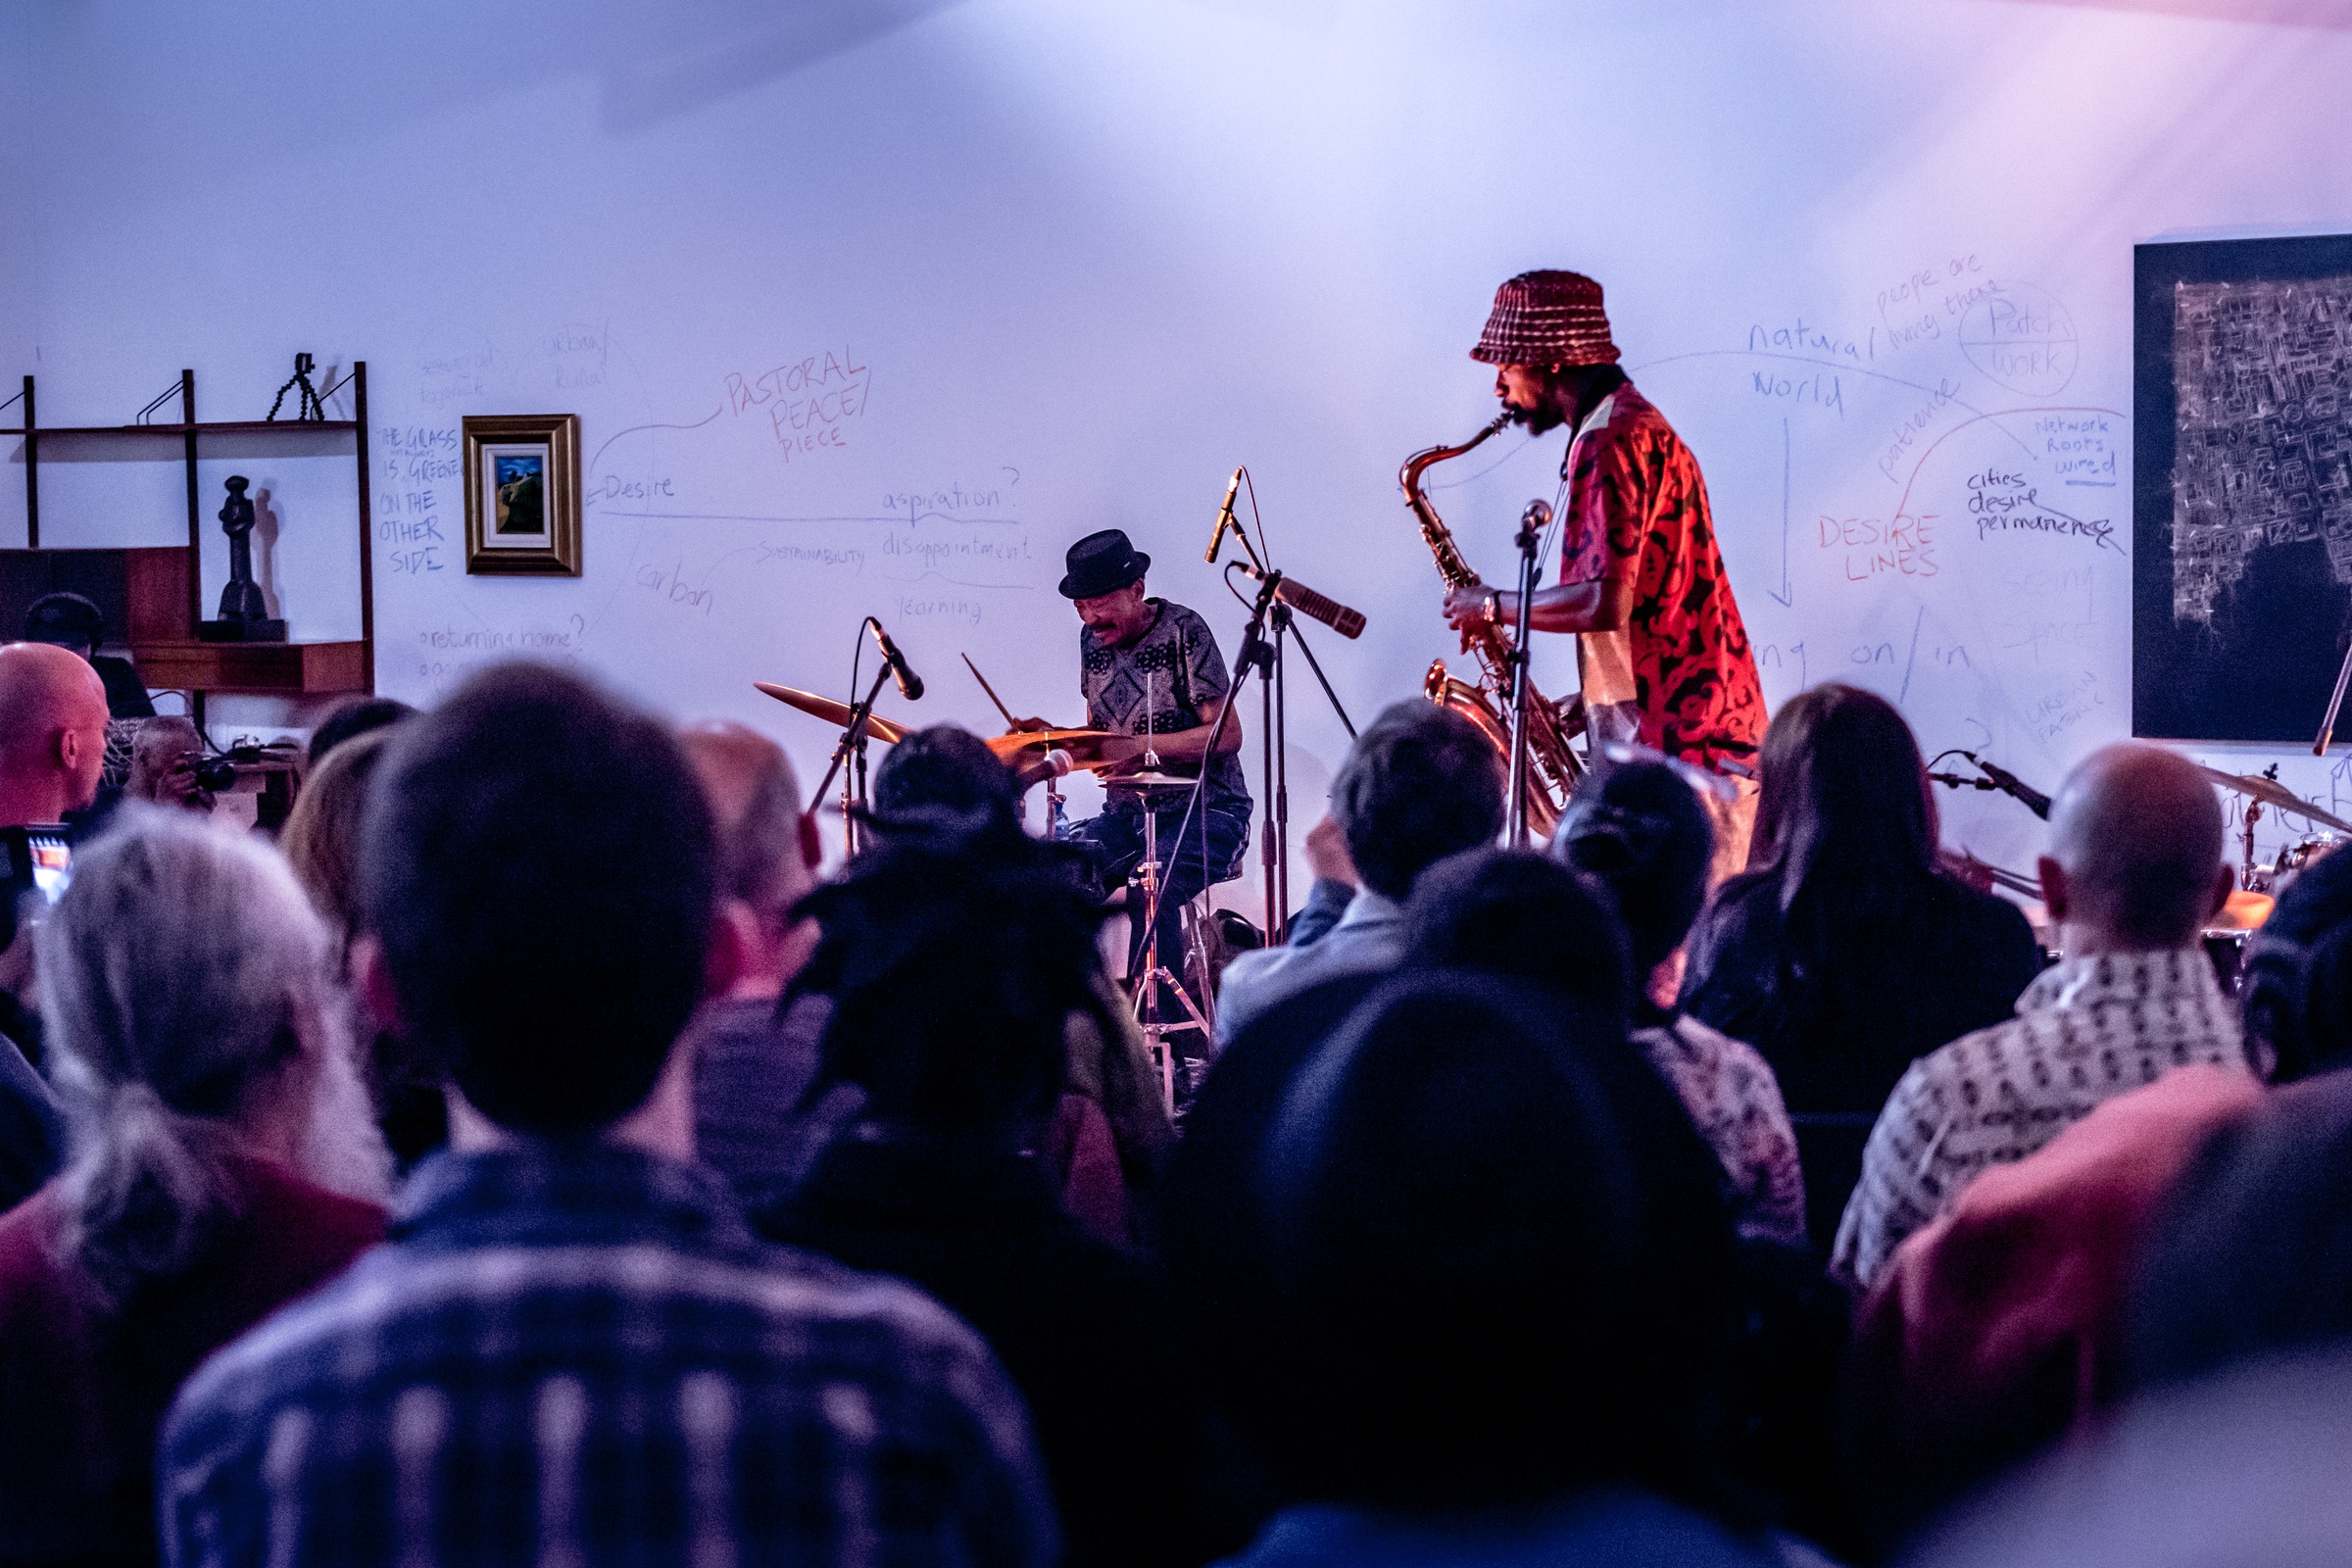 Event photograph from a performance by Shabaka and the Ancestors, with special guest Bra Louis Moholo-Moholo, on A4’s top floor. At the back, the musicians are performing in front of a white wall that features text and drawings, with Gerard Marx’s mixed media work ‘Prayer Carpet: Aerial’ mounted on the wall on the right. At the front, attendees are seated.
